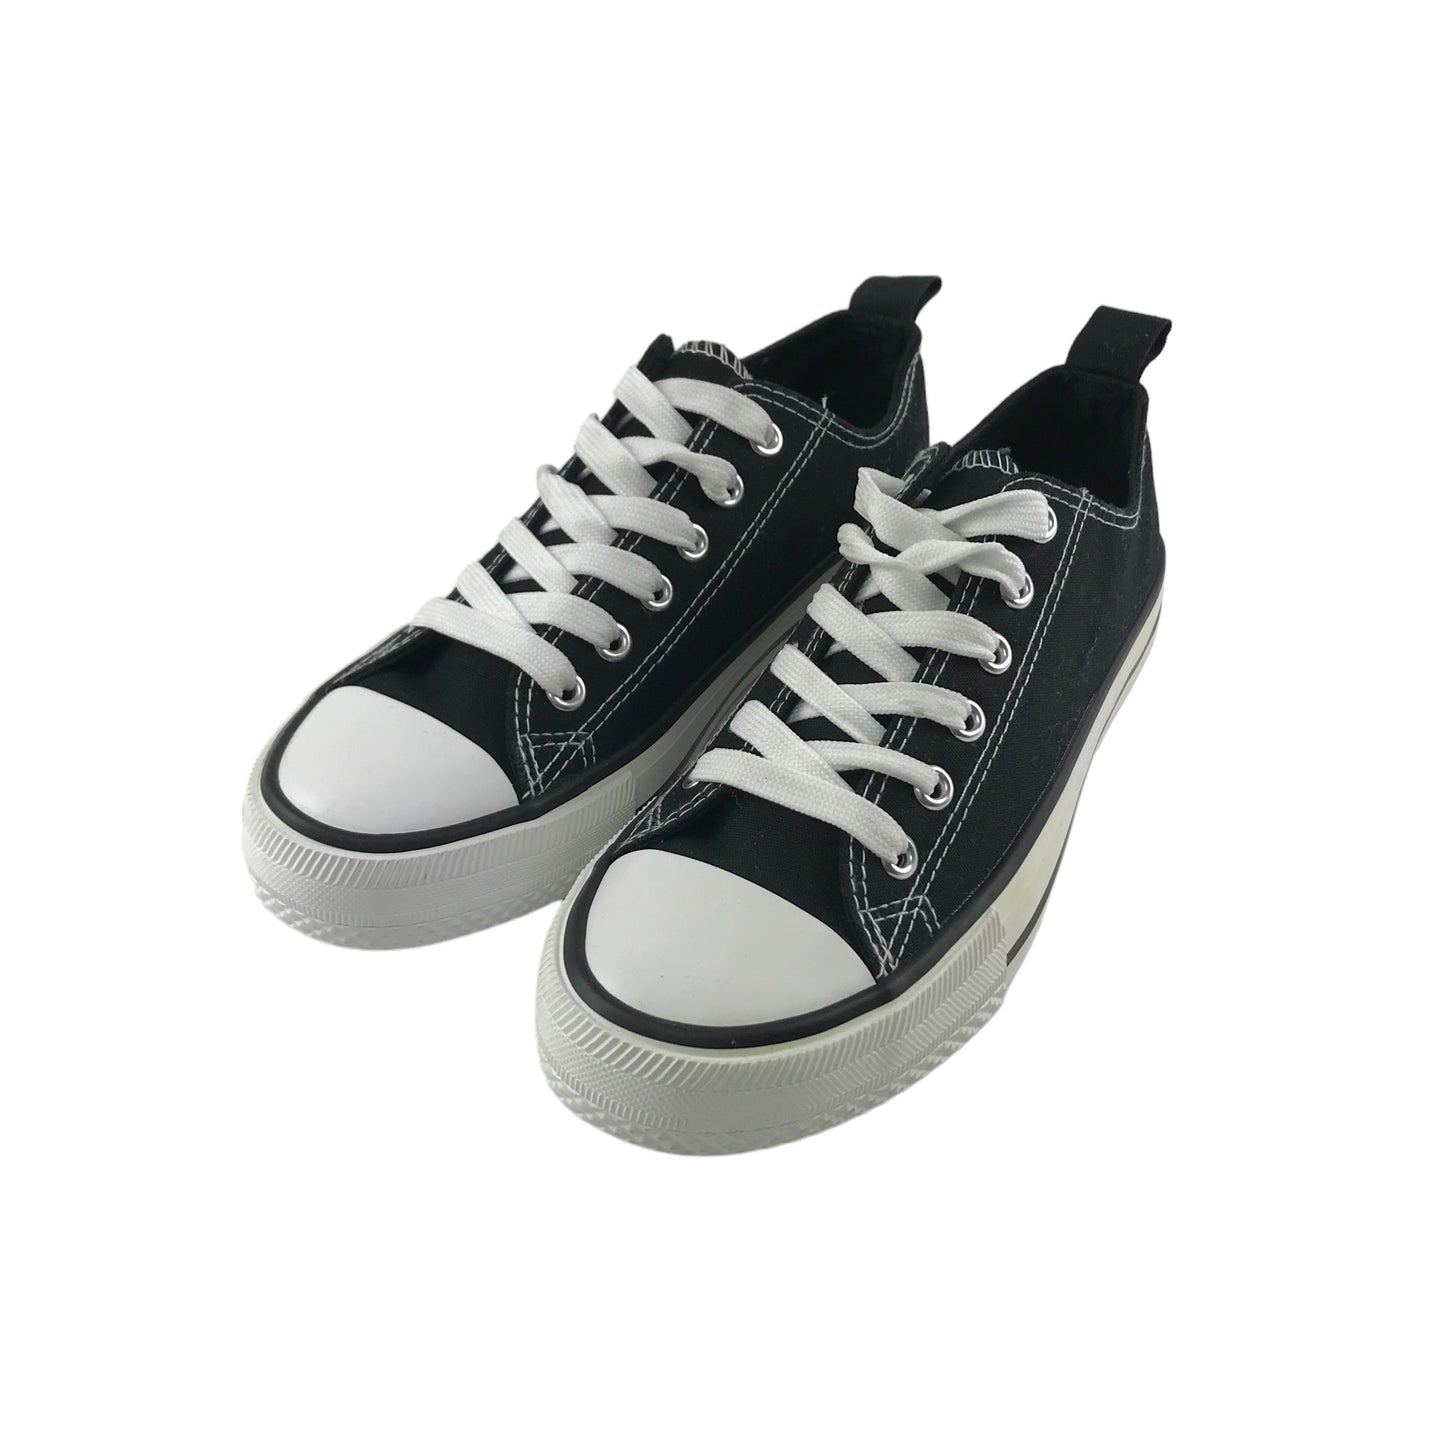 Primark Plimsole Trainers Shoe Size 4 Black White with Laces